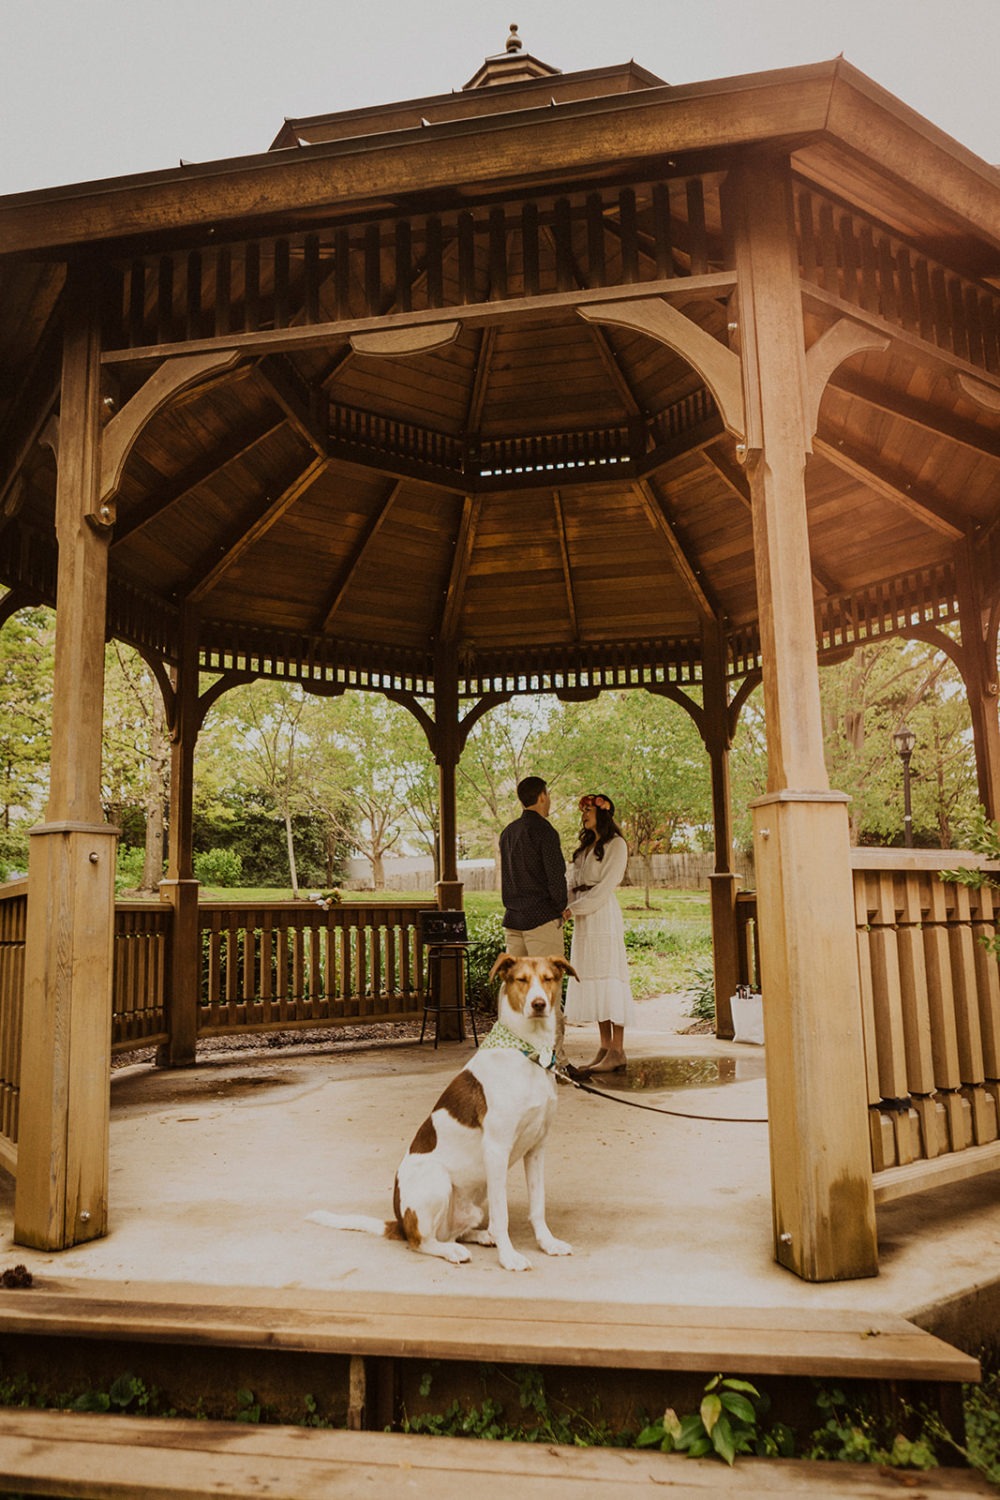 Dog stands leashed in gazebo with couple standing in background